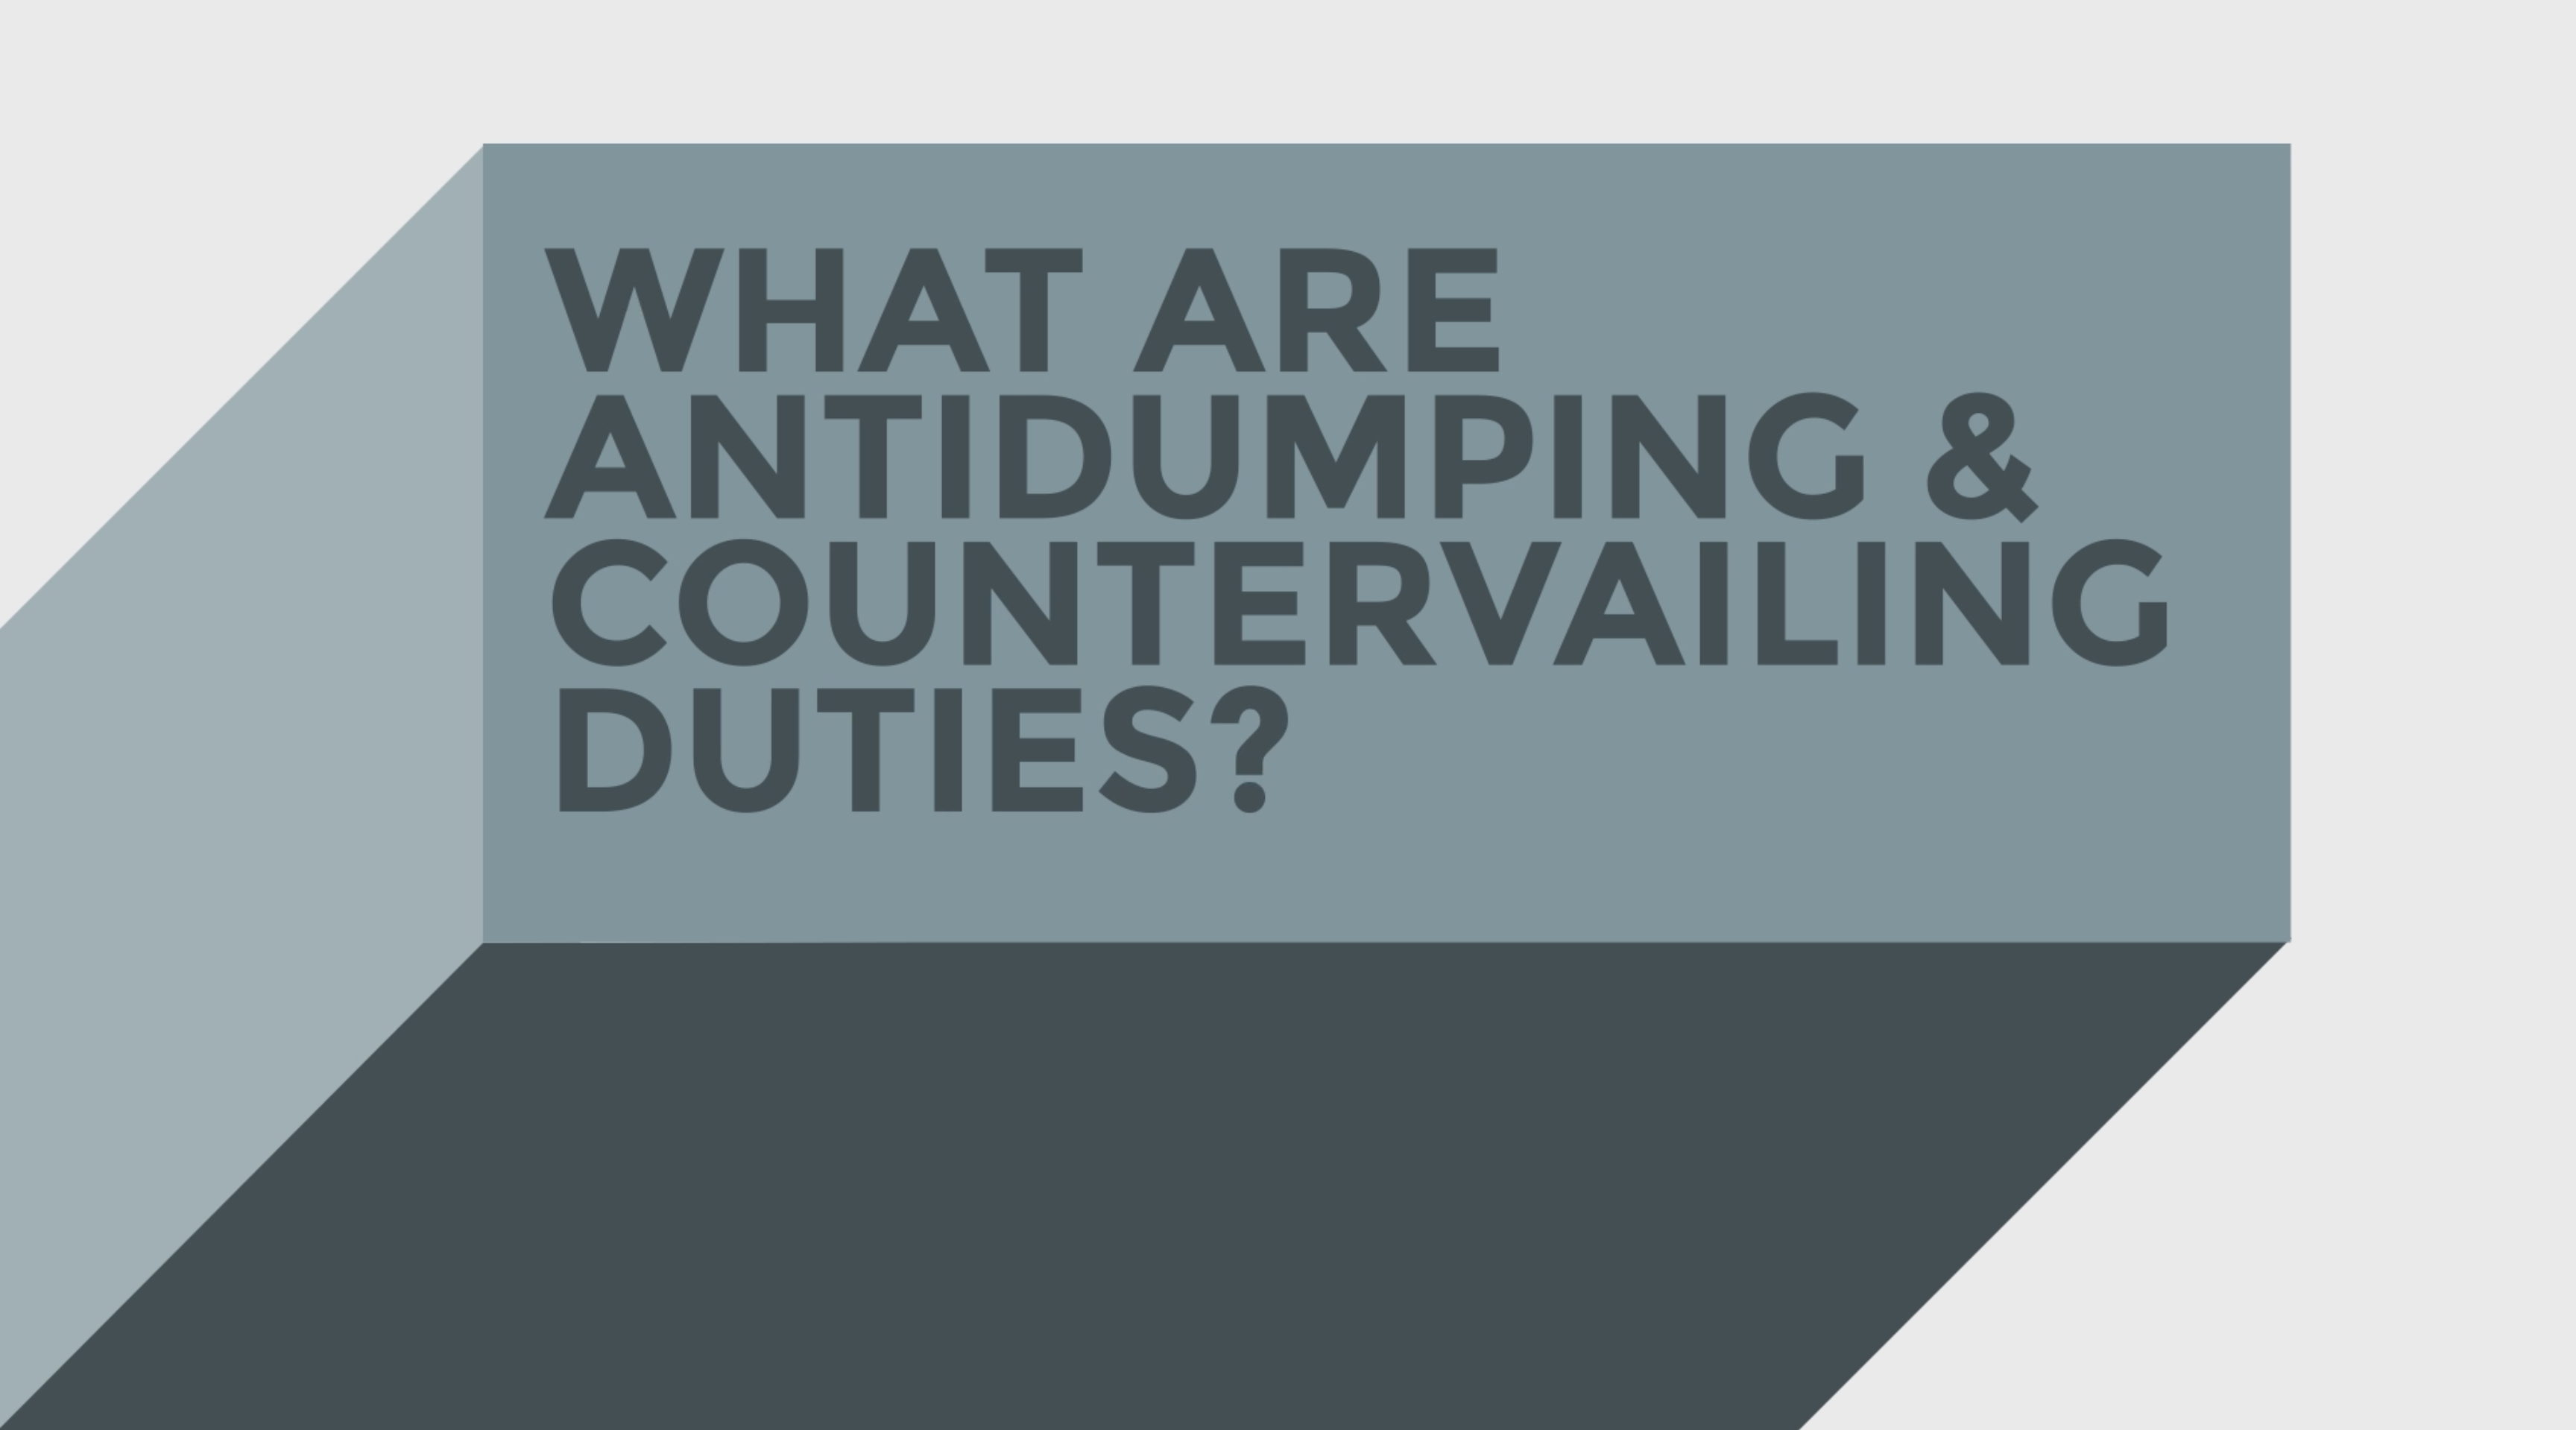 TRG presents an educational video explaining what antidumping and countervailing duties are.